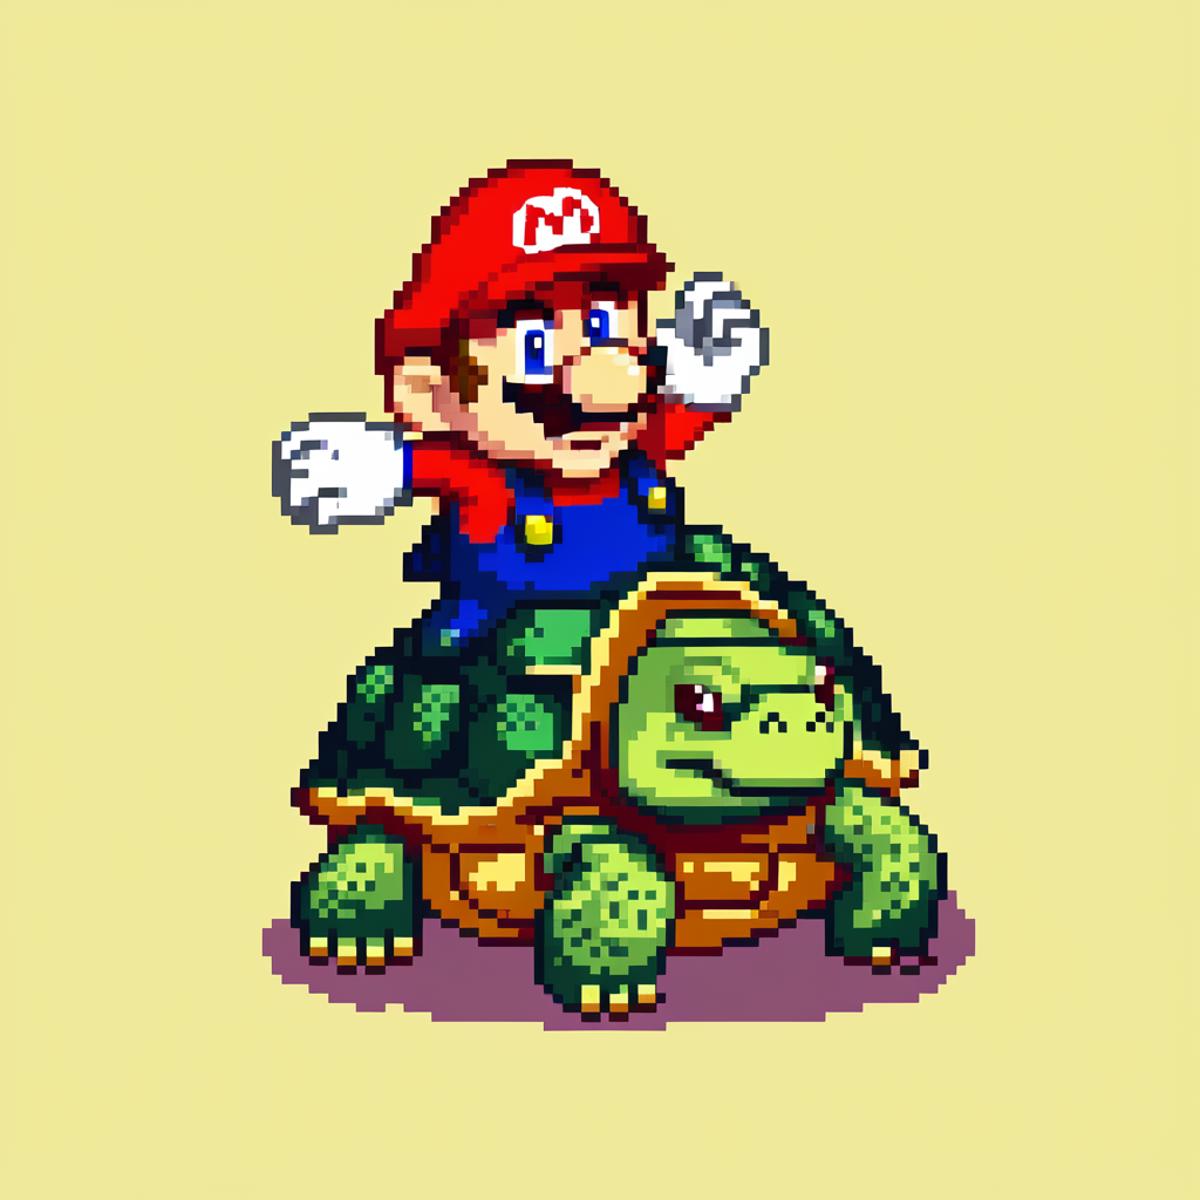 A character rides on the back of a turtle in a video game.